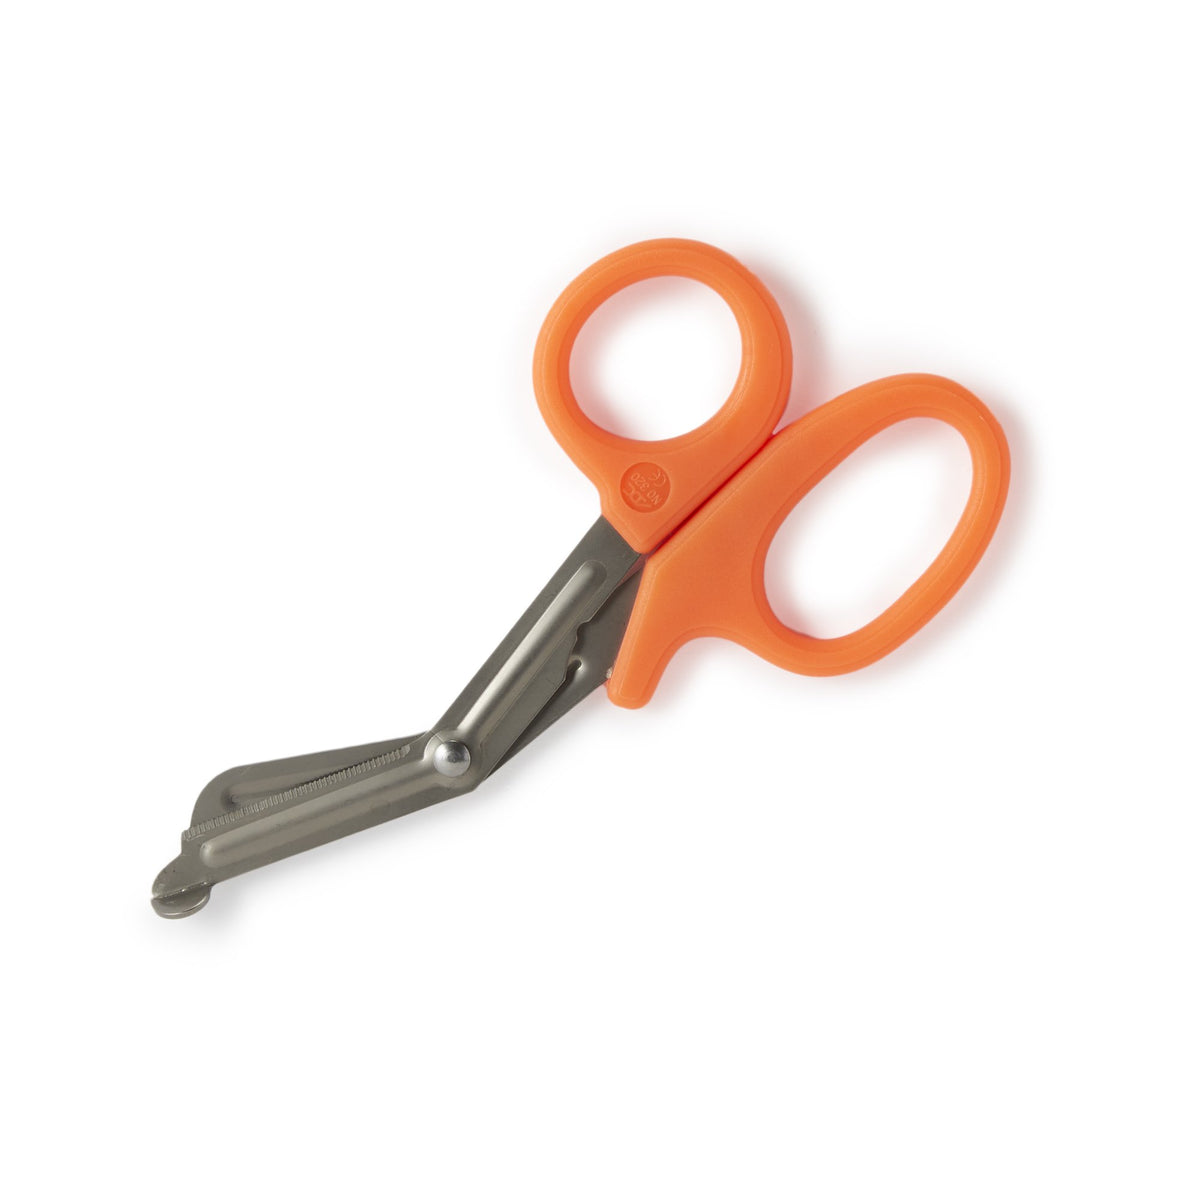 GetUSCart- Trauma Shears with Carabiner - Stainless Steel Bandage